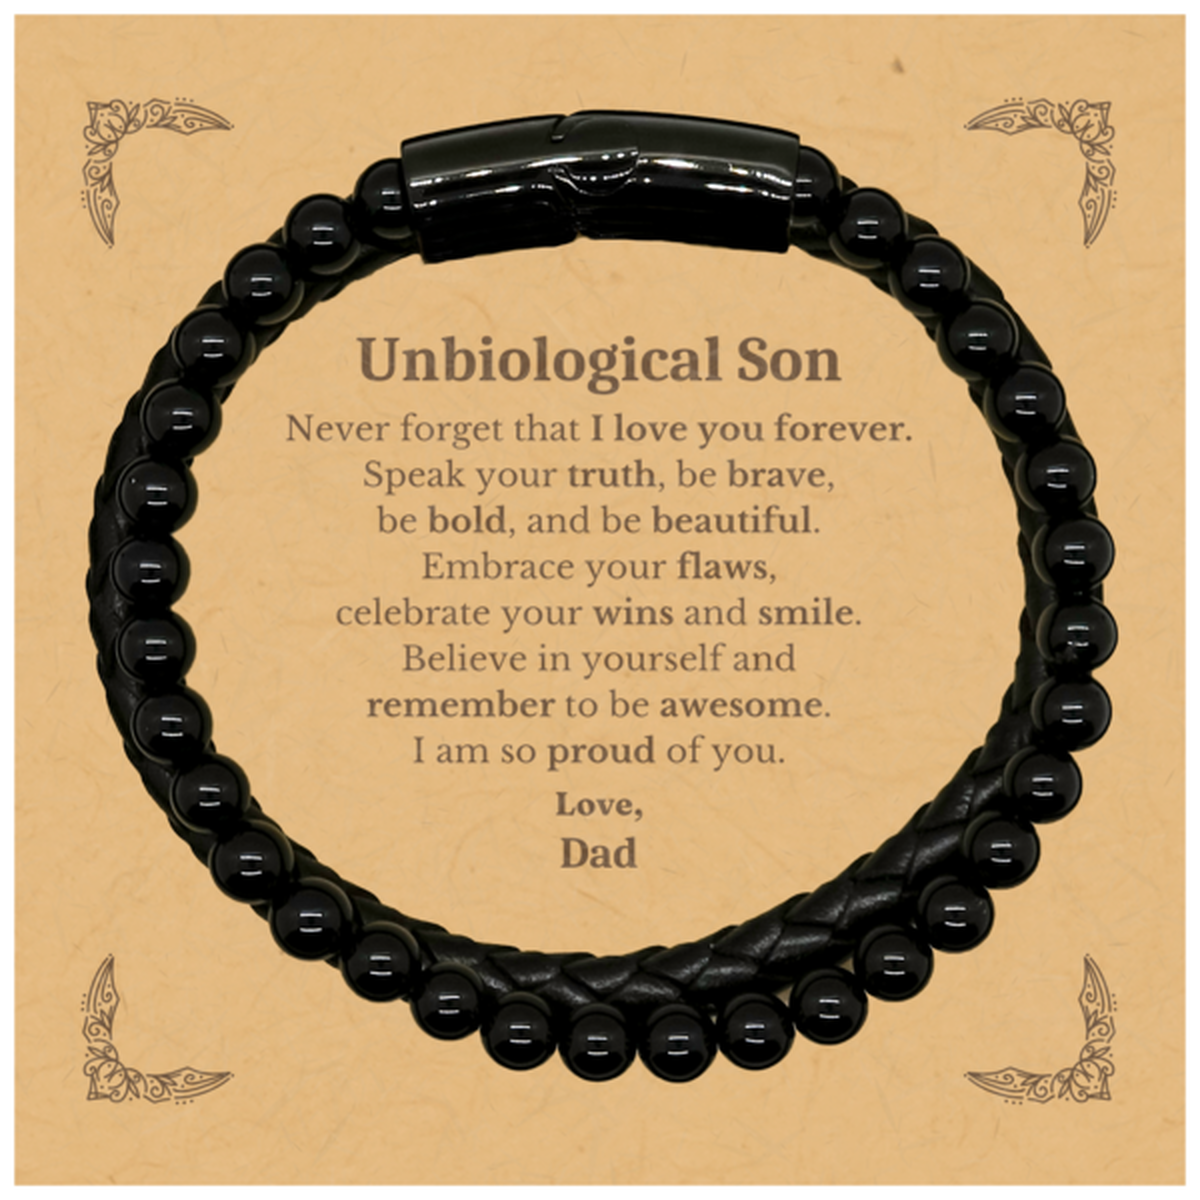 Unbiological Son Stone Leather Bracelets, Never forget that I love you forever, Inspirational Unbiological Son Birthday Unique Gifts From Dad